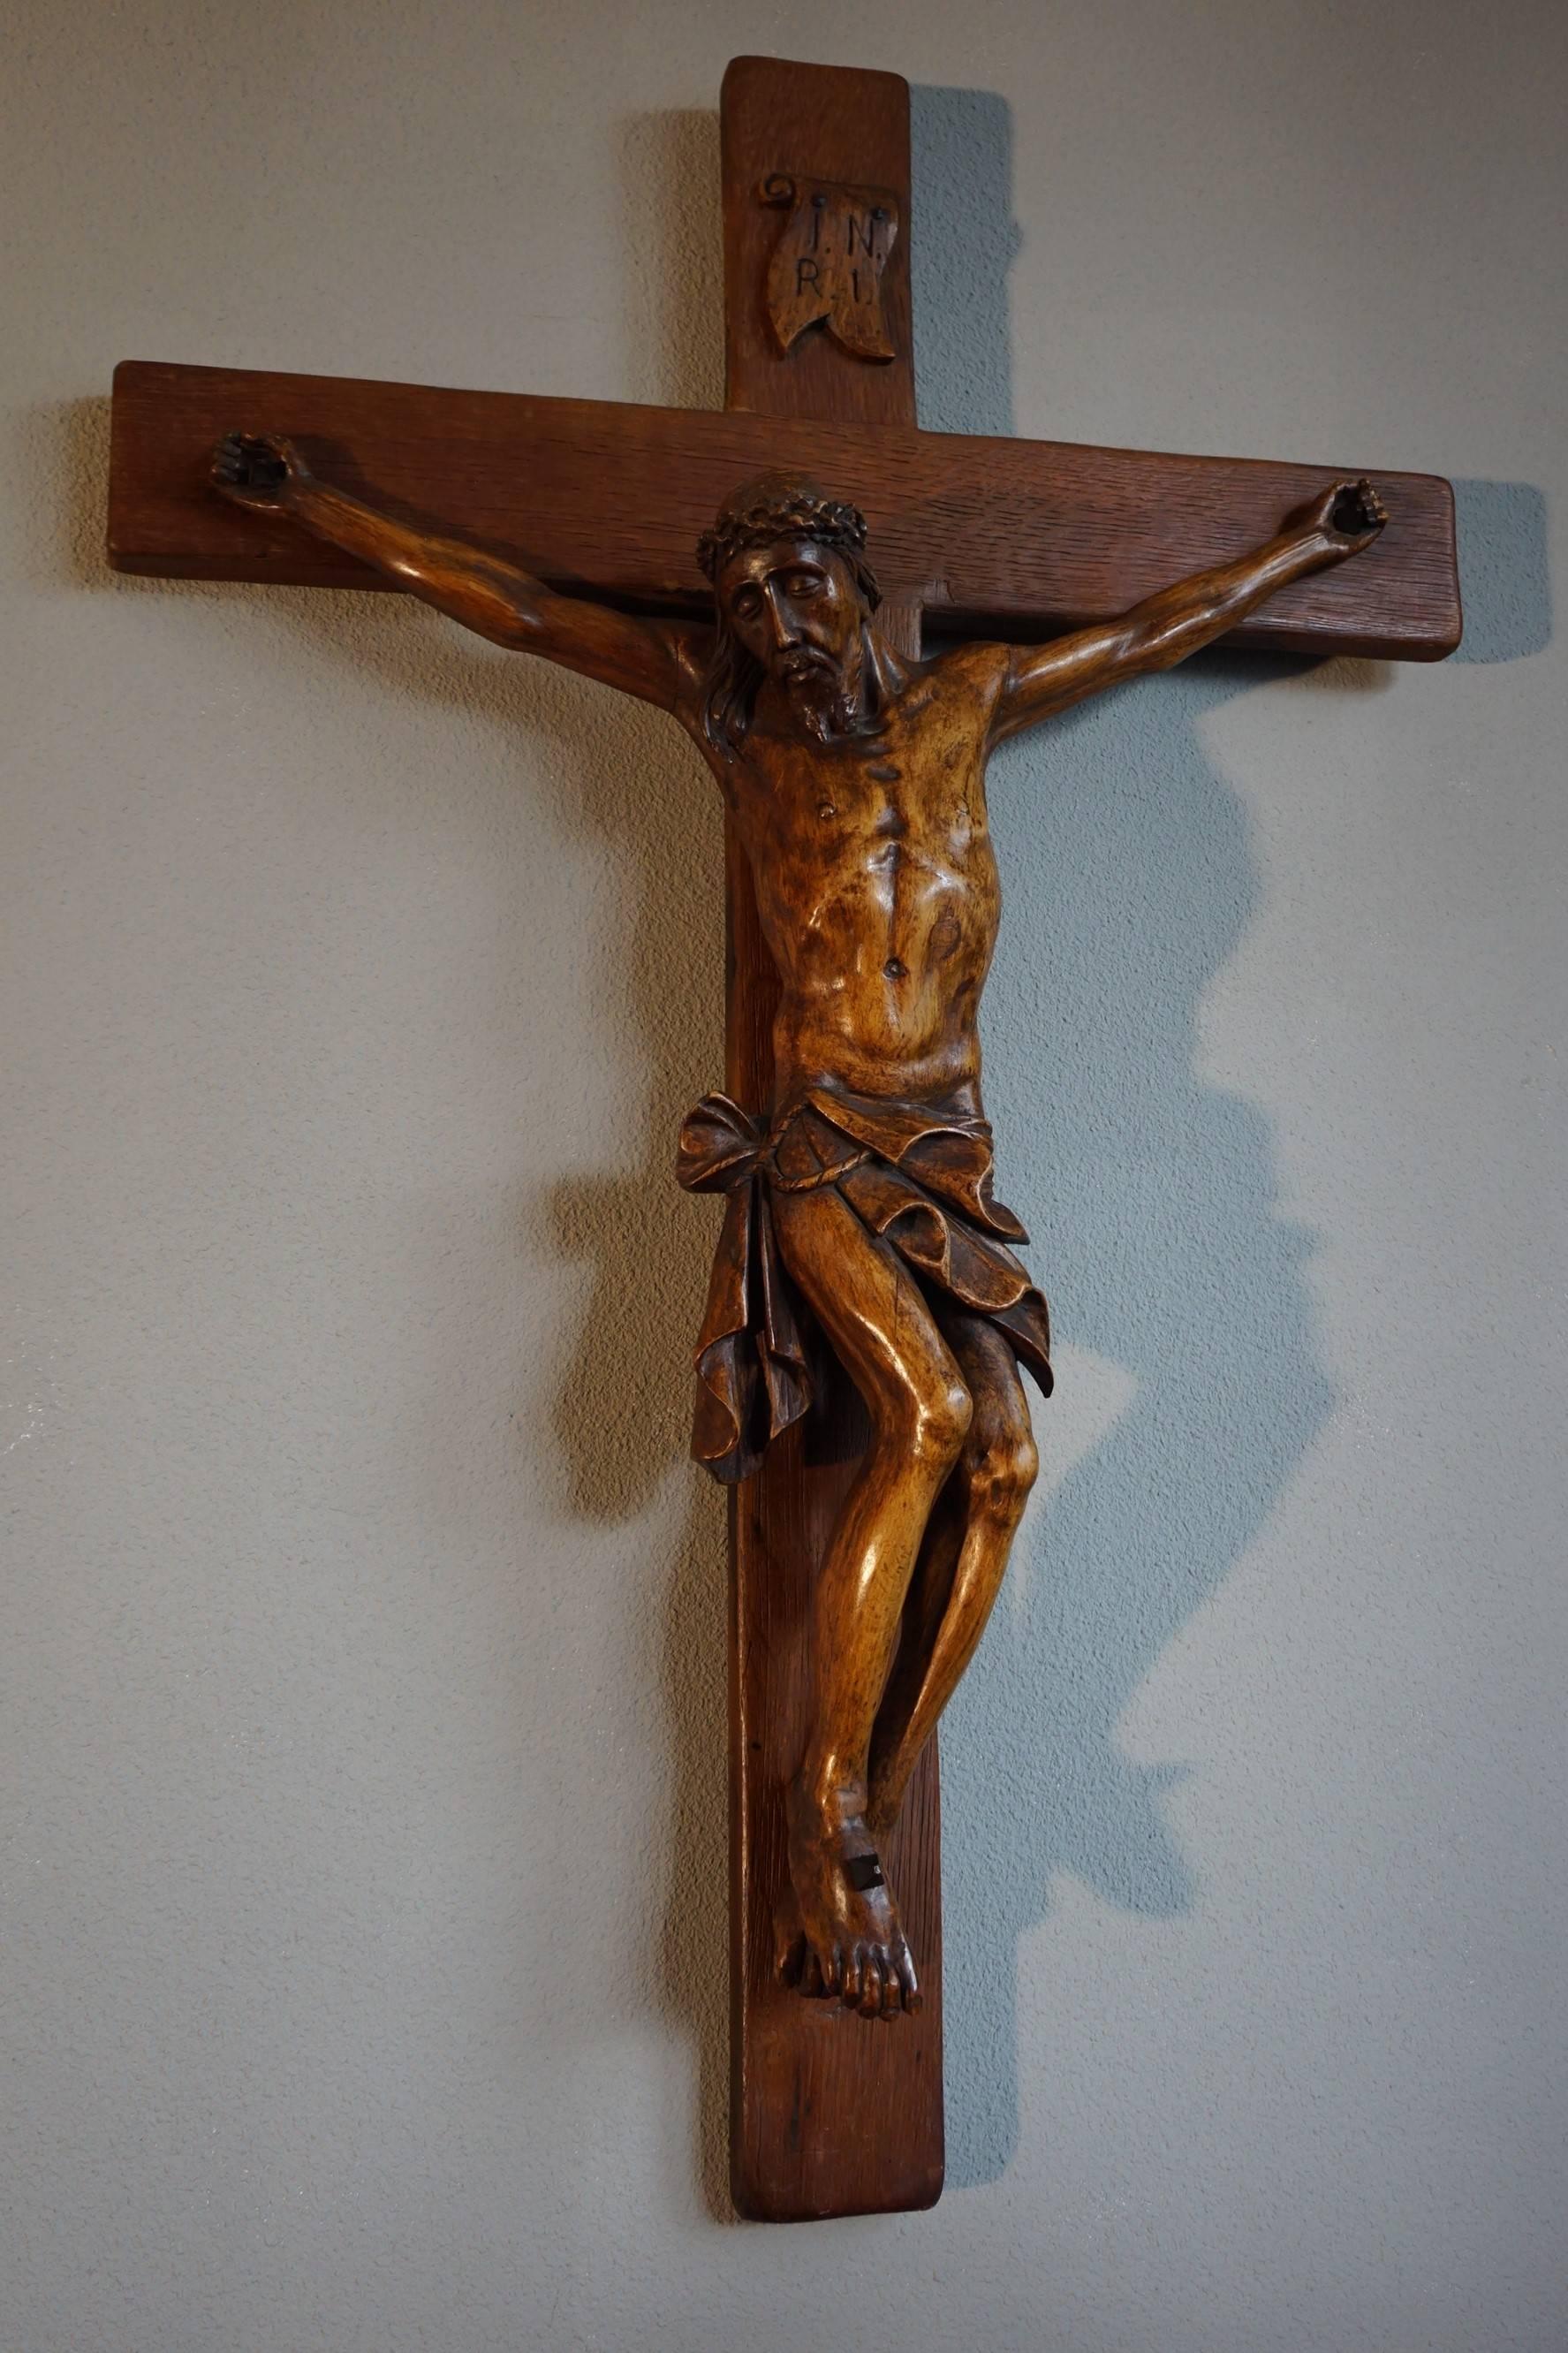 One of a kind, large crucifix with an amazing patina.

This remarkable and sizeable corpus of a suffering Christ on the cross is different to almost all others. The artist who hand-sculpted this impressive work of religious art has not chosen to